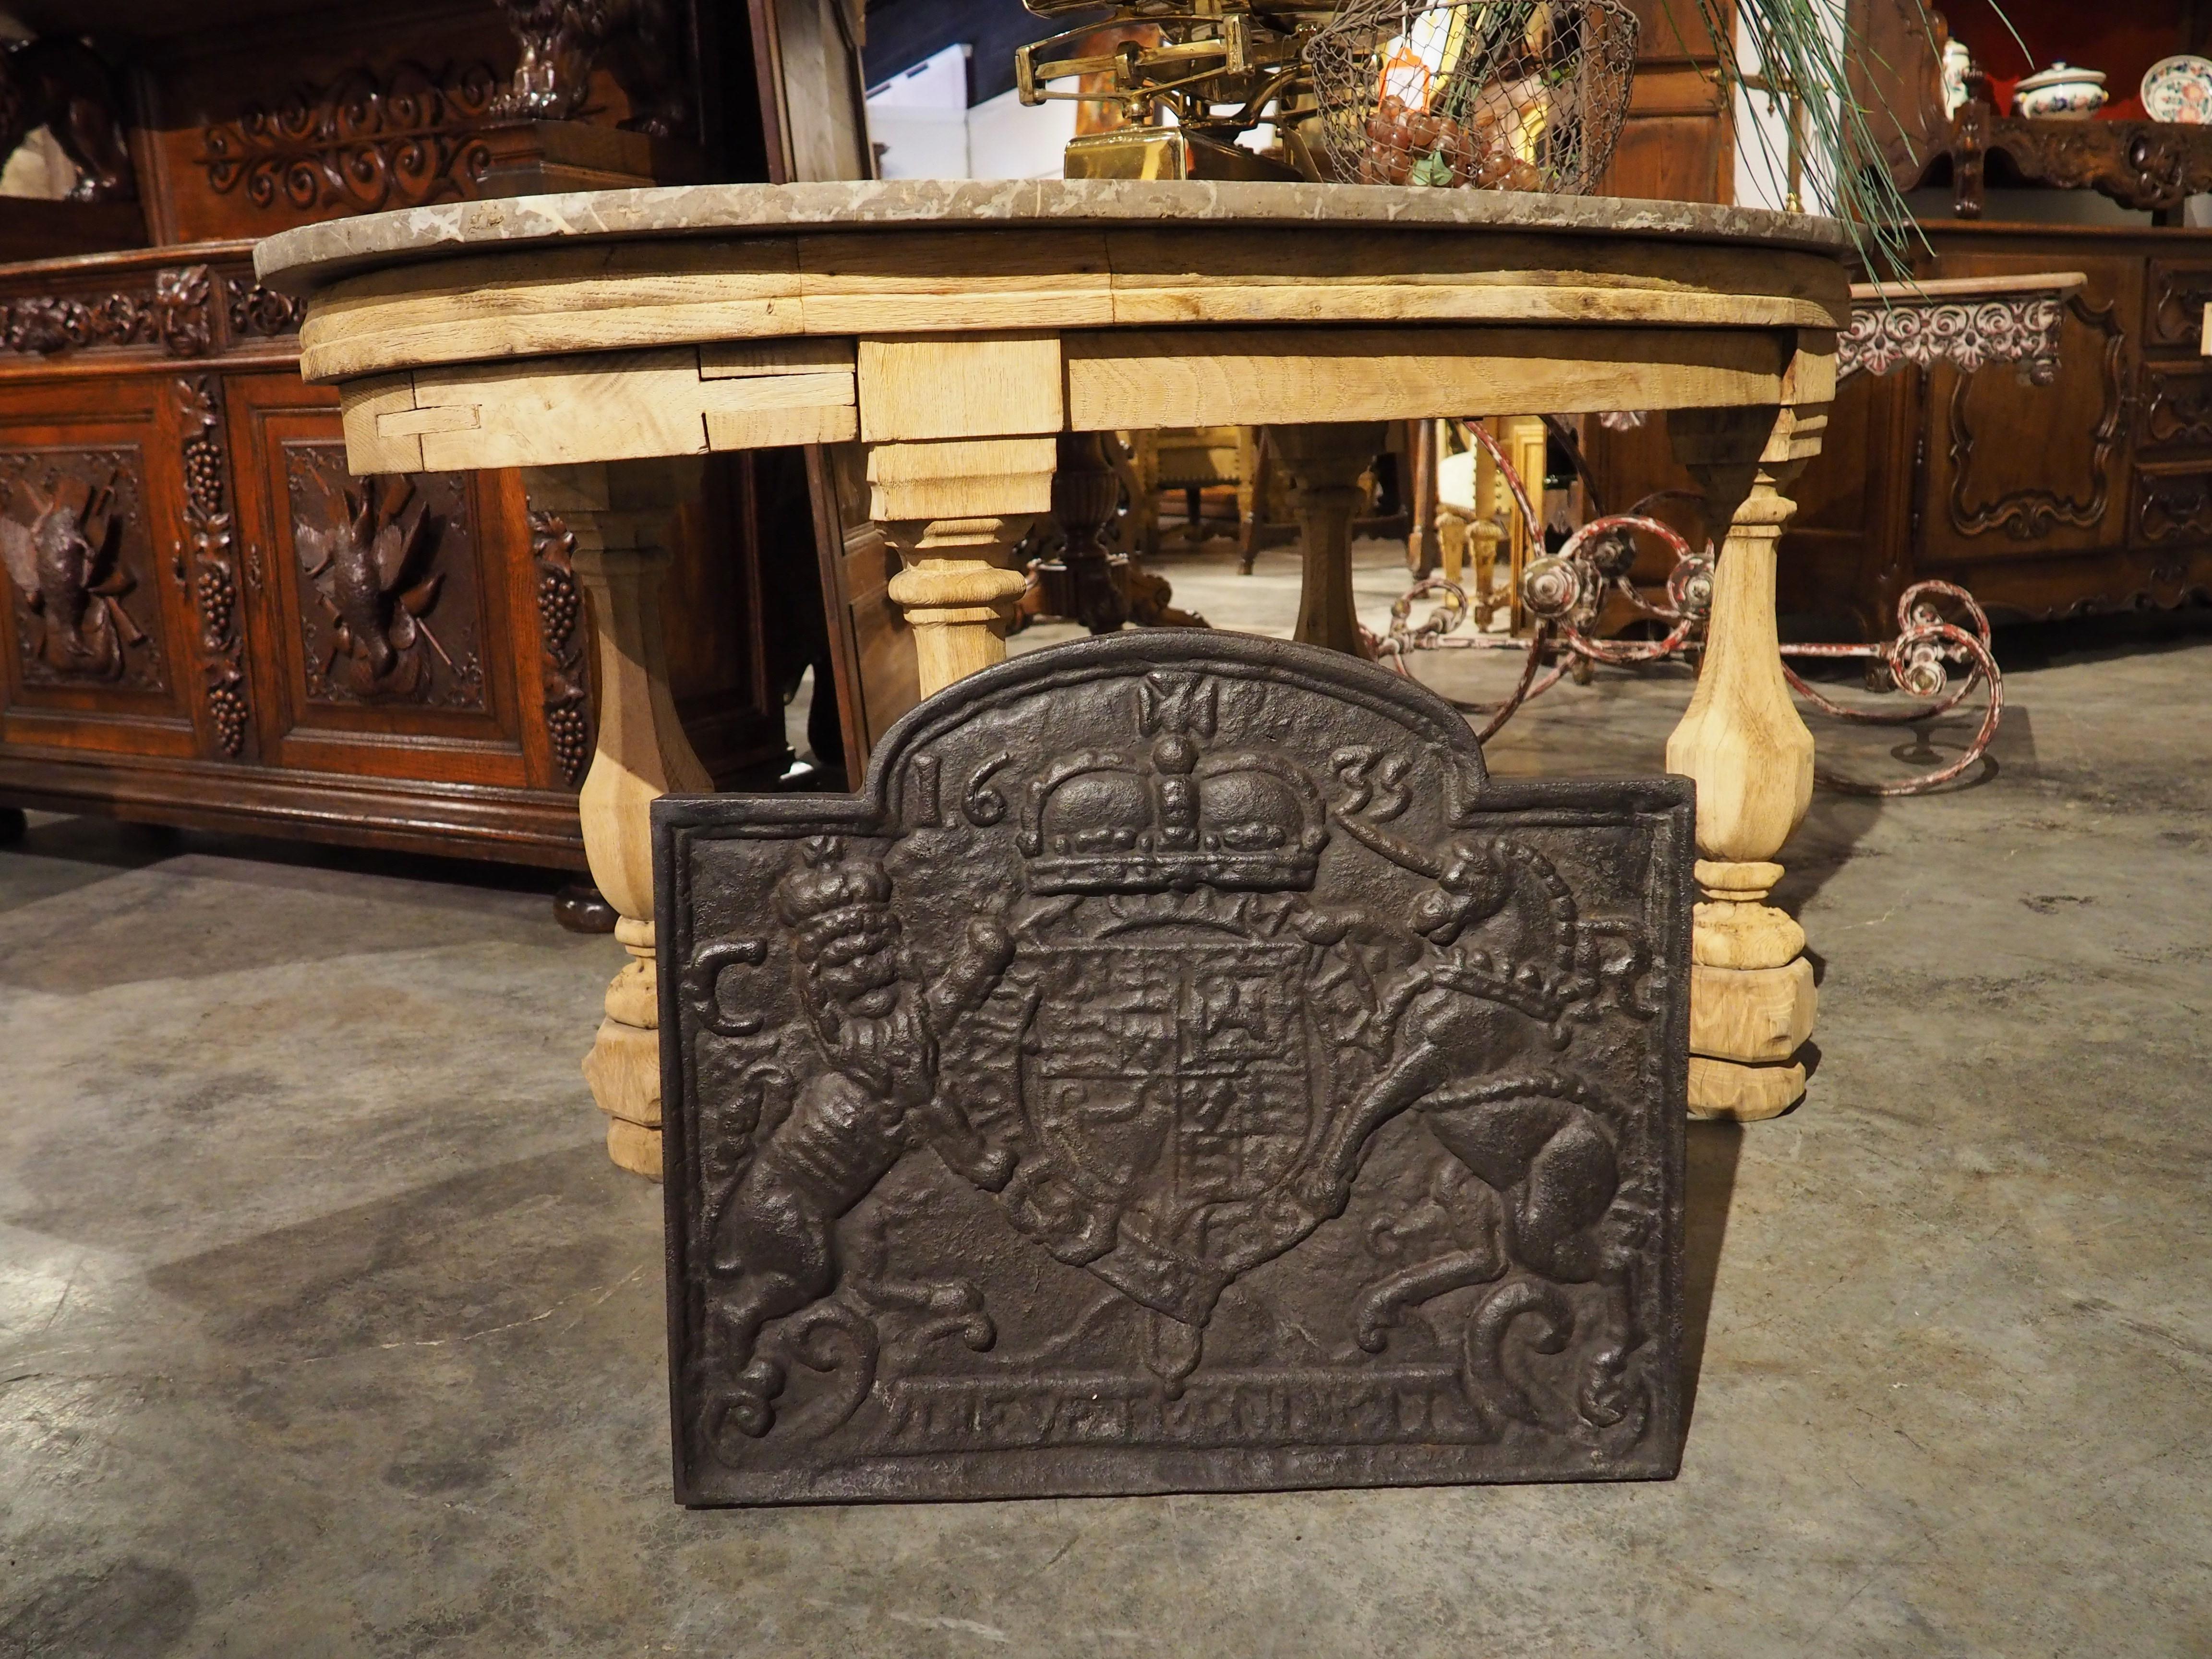 This antique cast iron fireback features the coat of arms of Charles I, King of England, Ireland, and Scotland from 1625-1649. It has recently been cleaned and lightly clear waxed to accentuate the motifs and provide a rich and even patina.

The